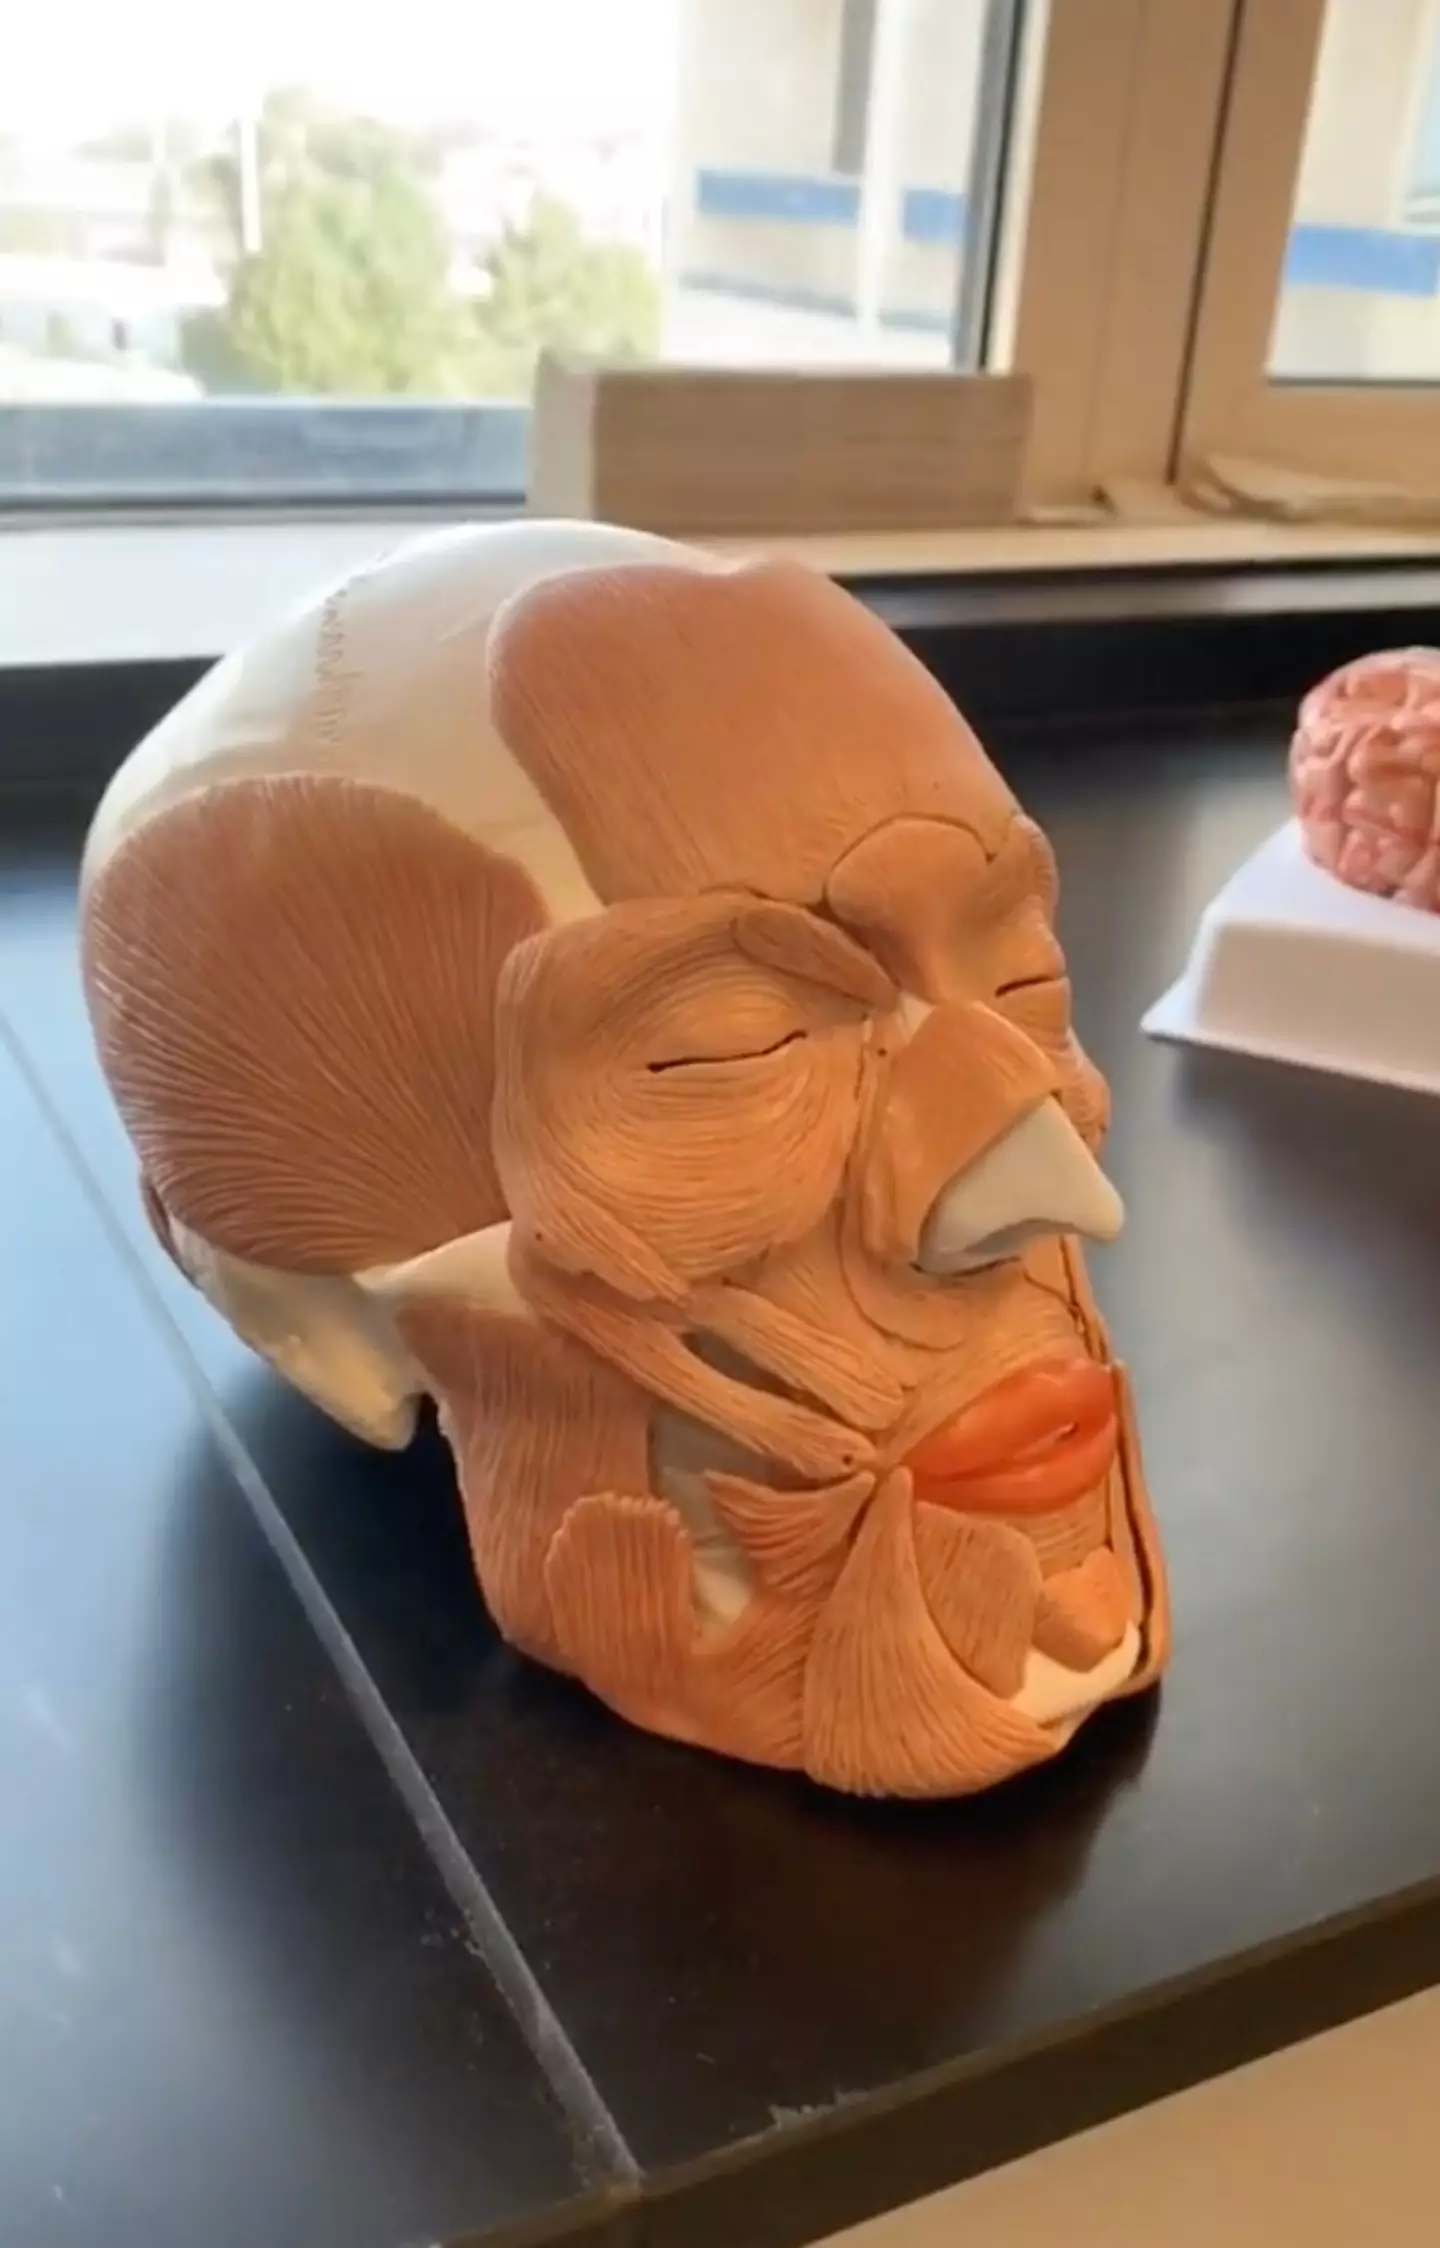 The video explaining where dimples come from left has people stunned (TikTok/@instituteofhumananatomy)